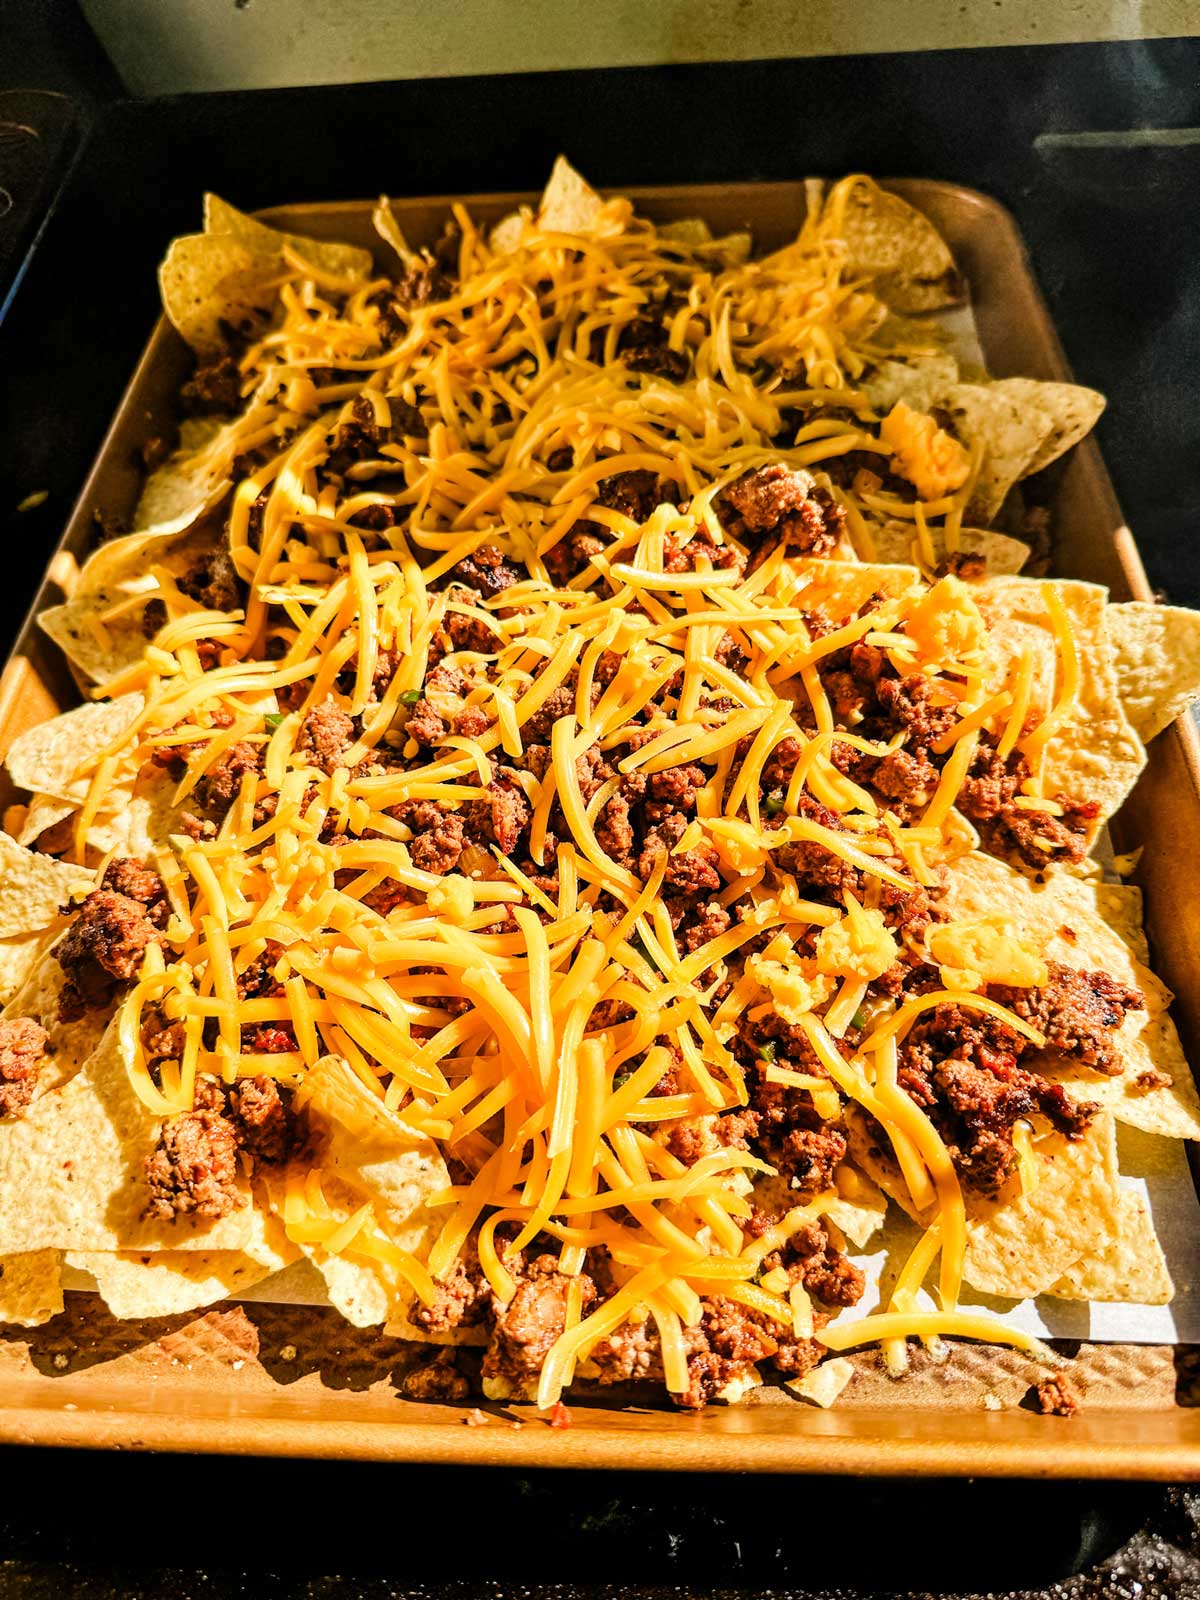 Nachos that have just had cheese sprinkled on top of them.